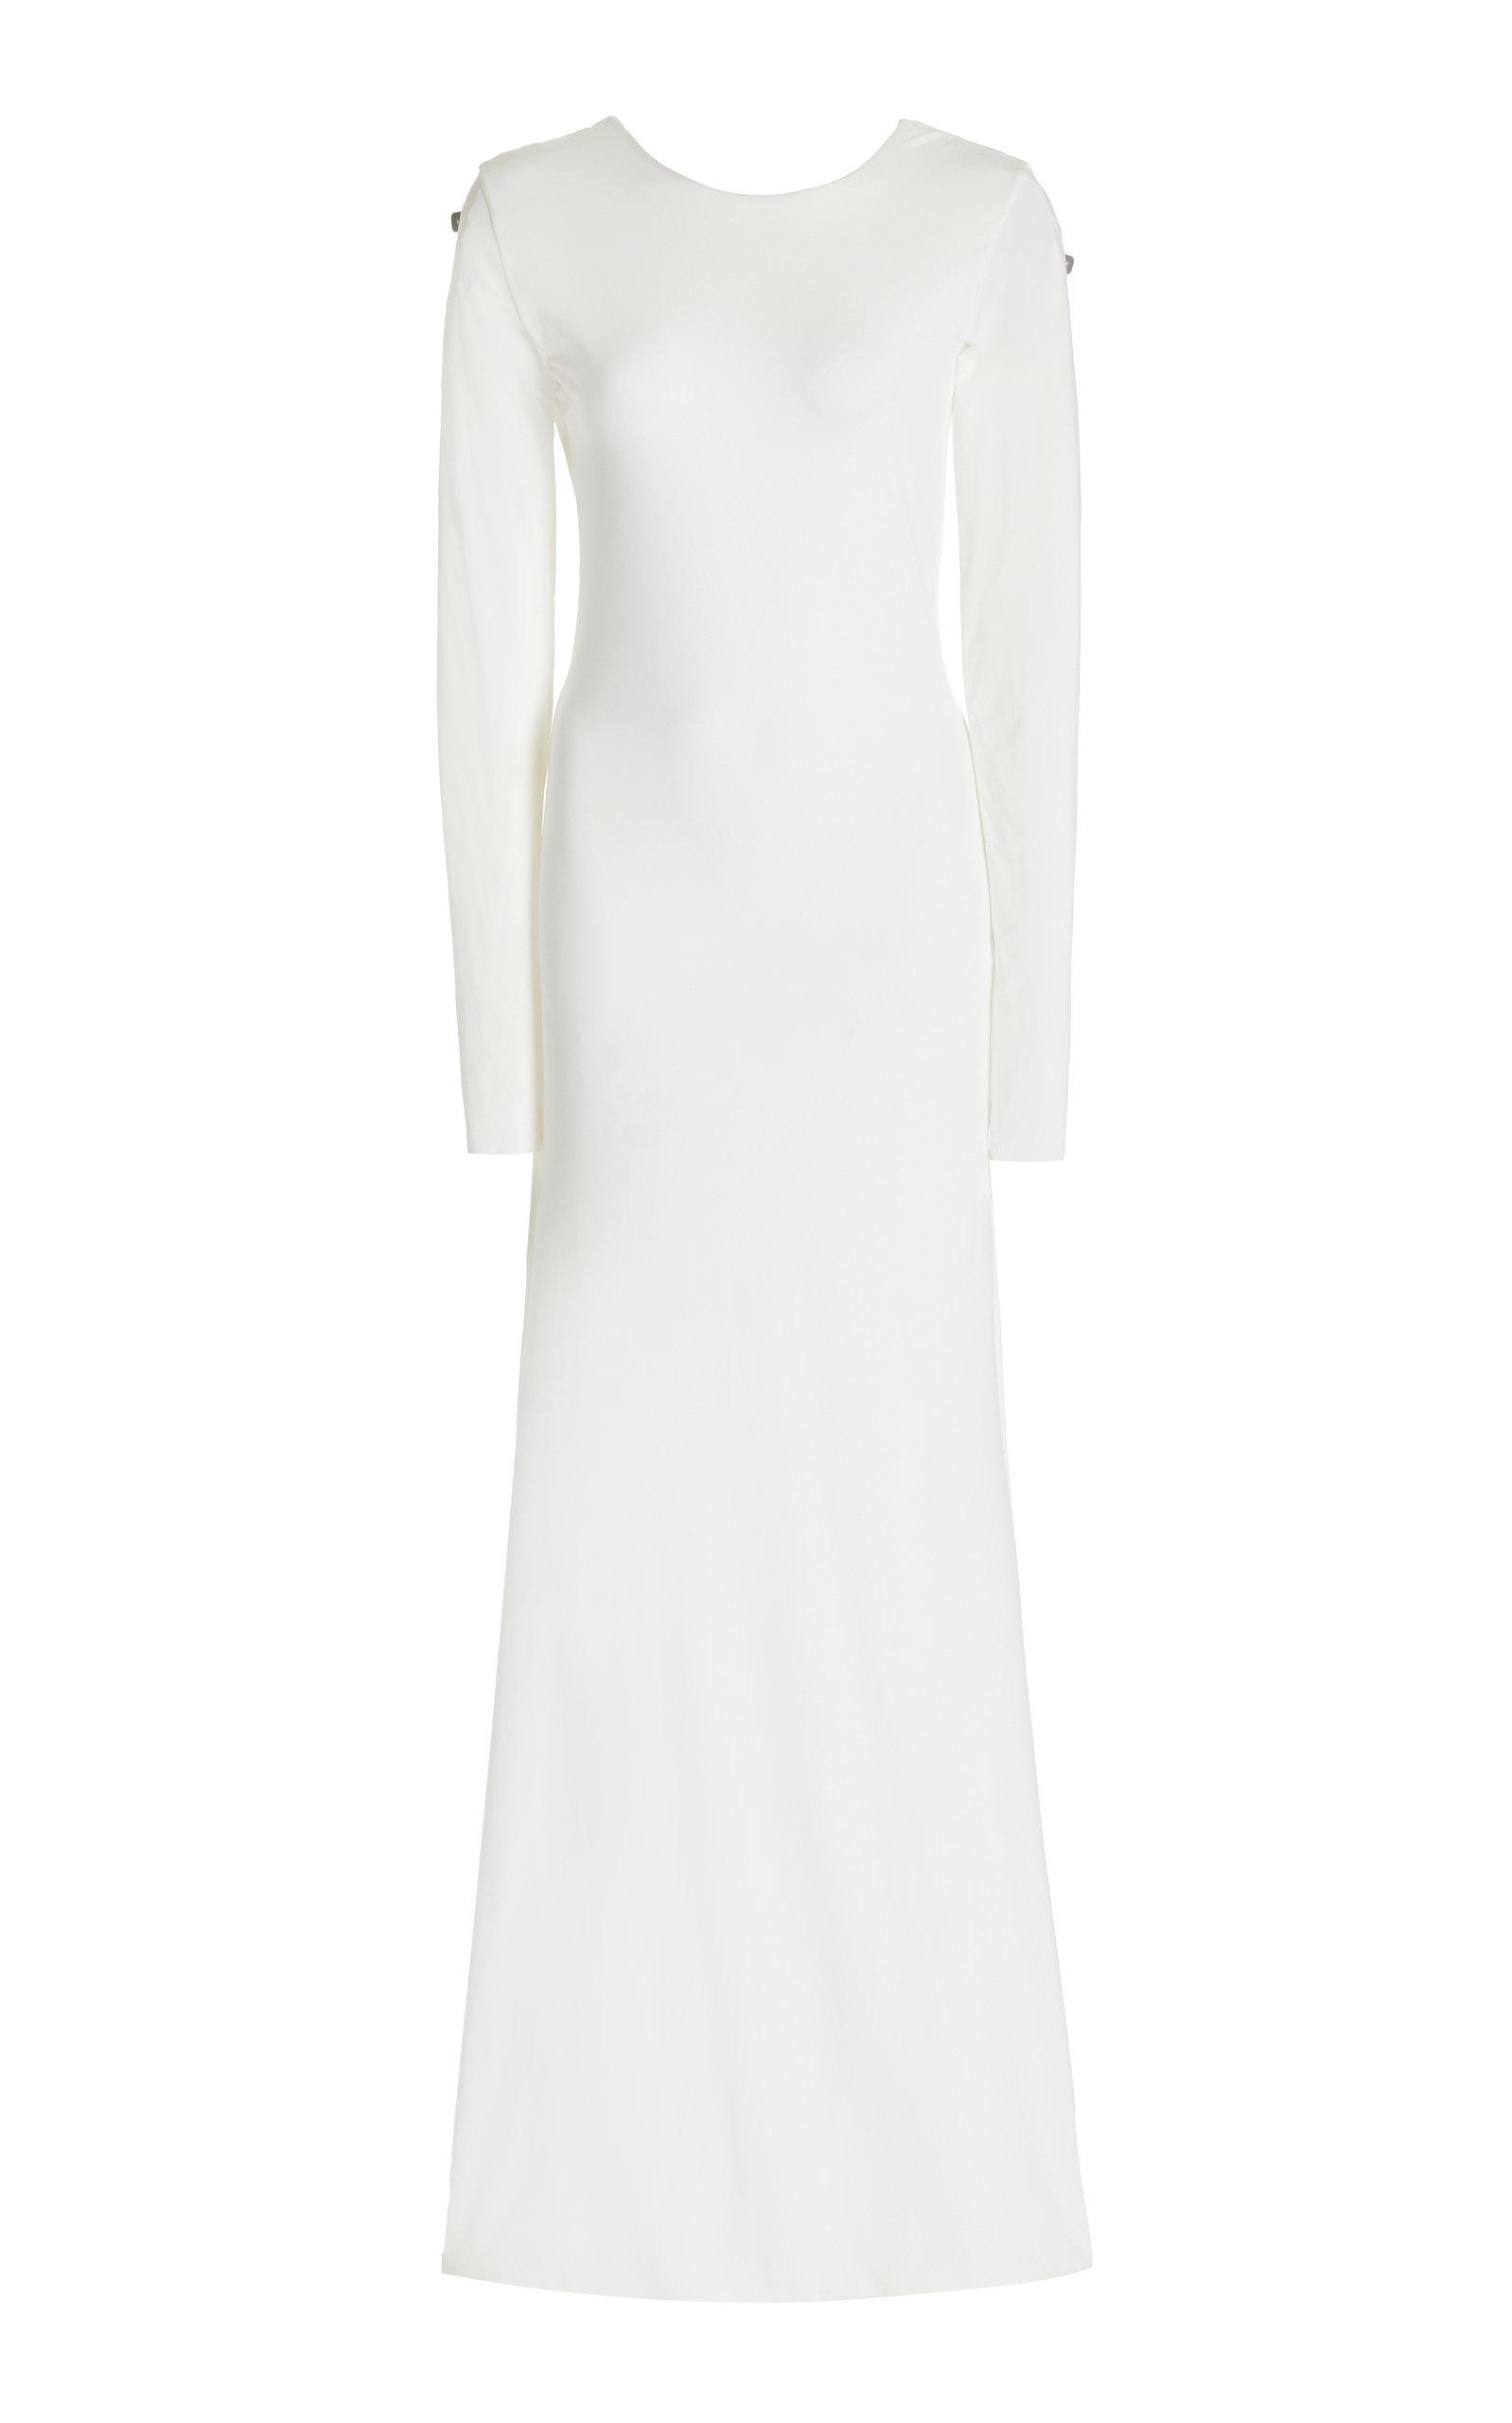 Maygel Coronel Heliconia Dress in White | Lyst